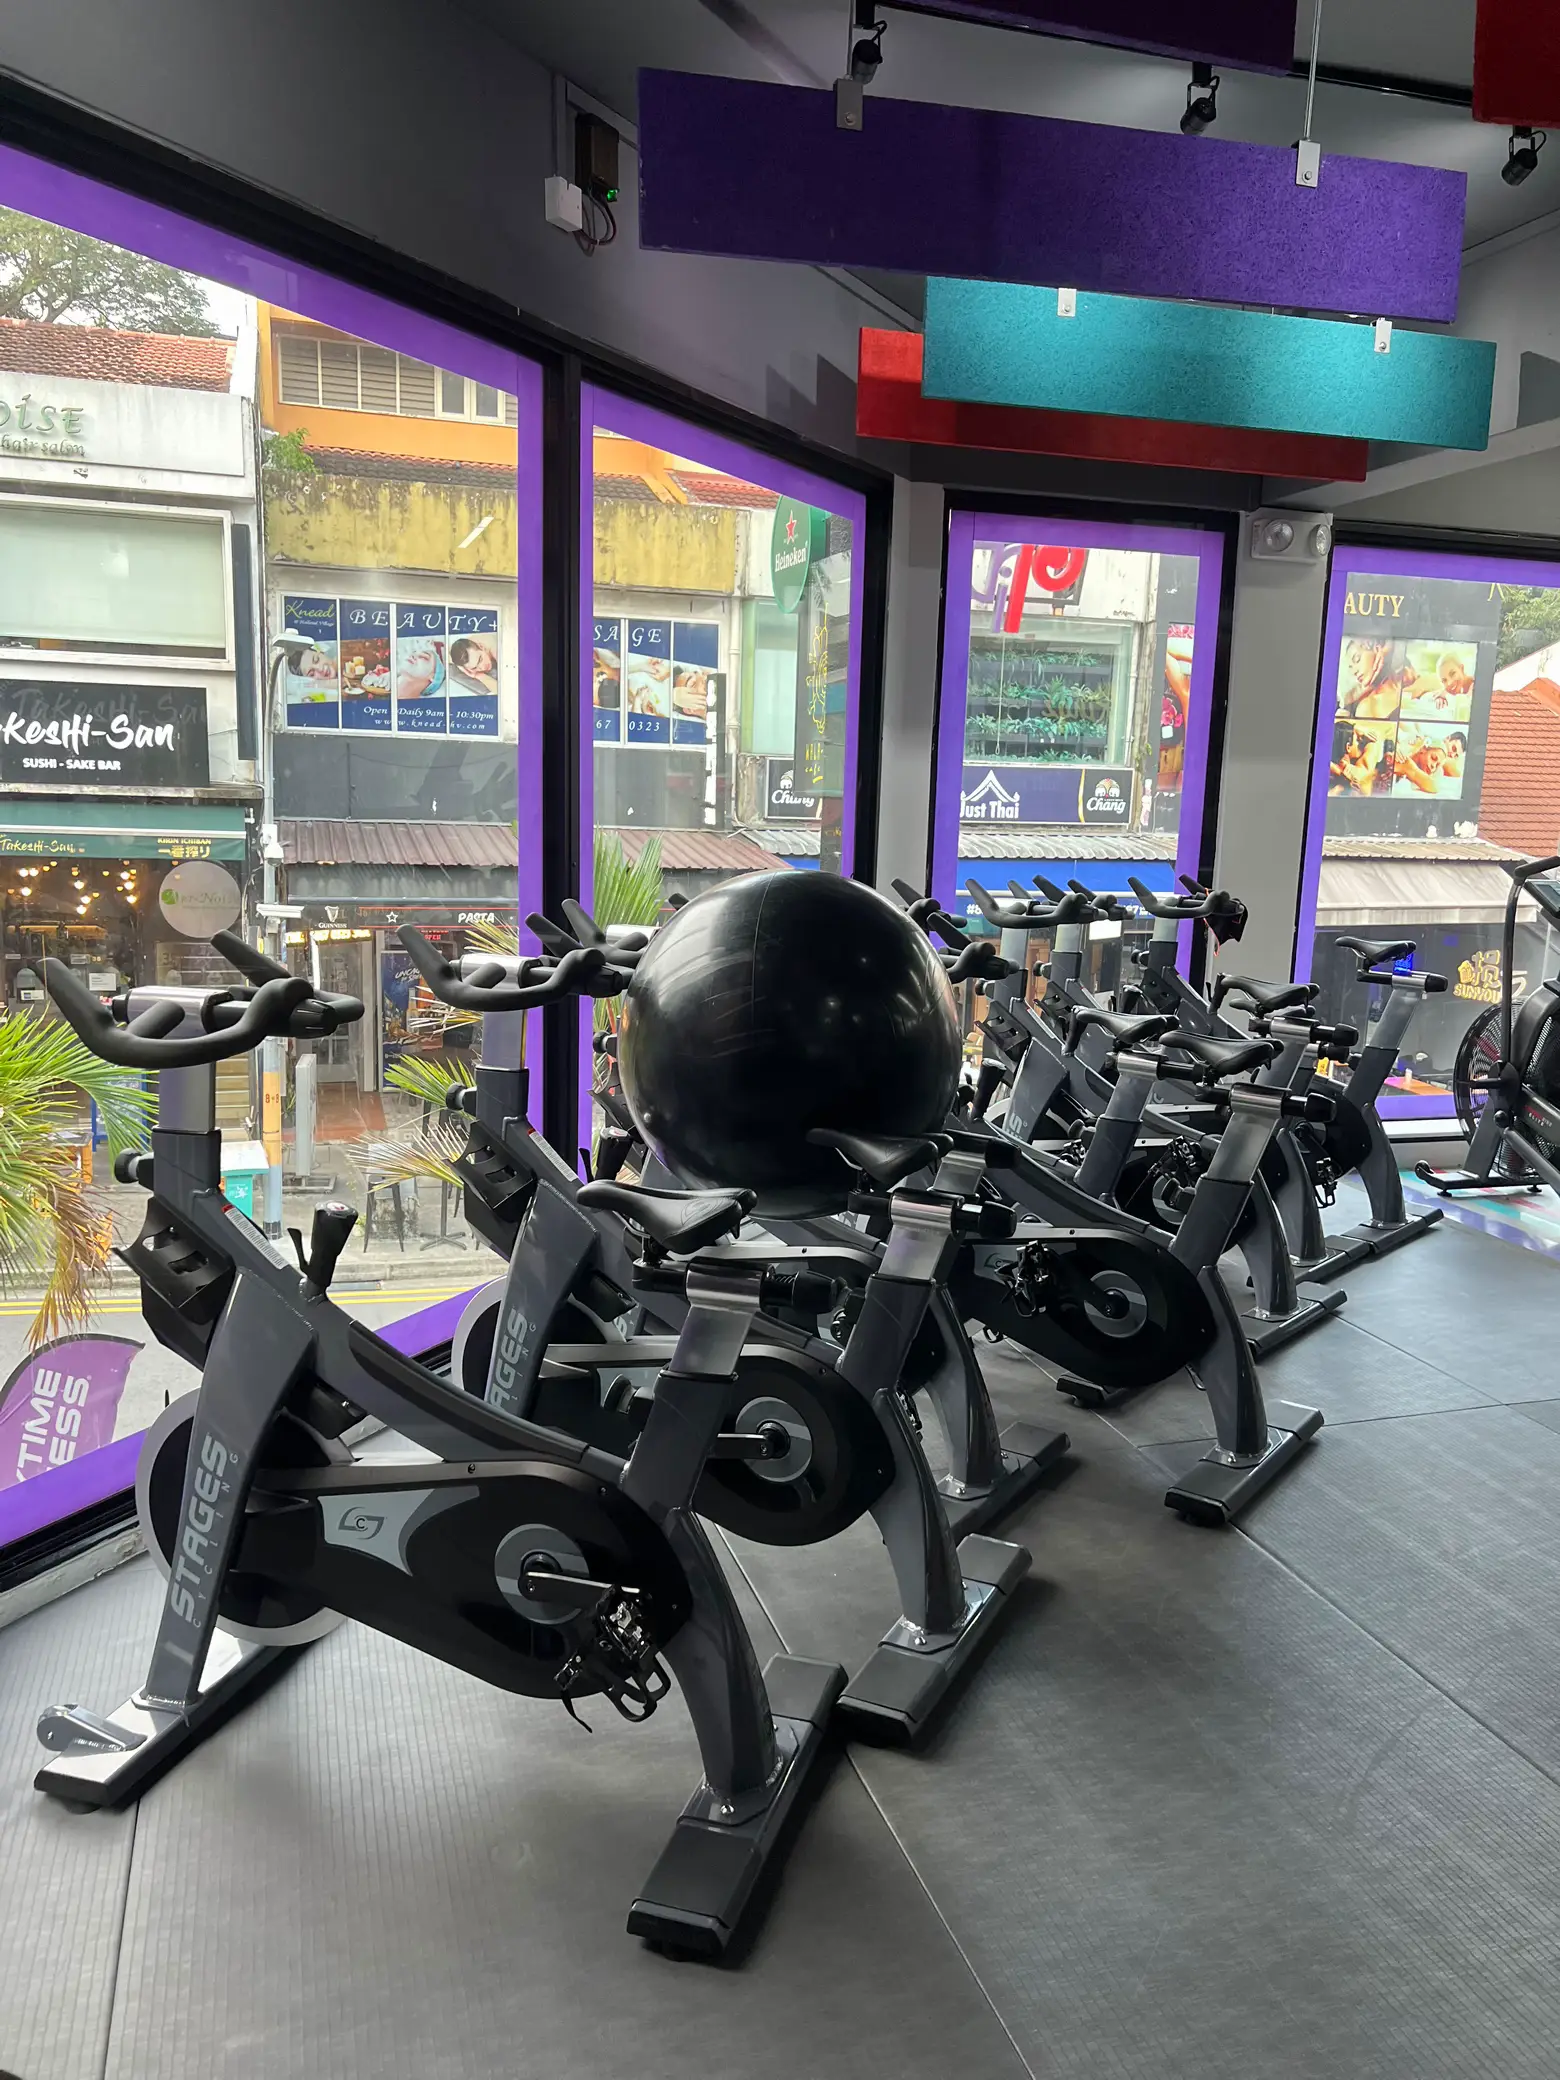 SHOULD YOU INVEST IN AN ANYTIME FITNESS MEMBERSHIP